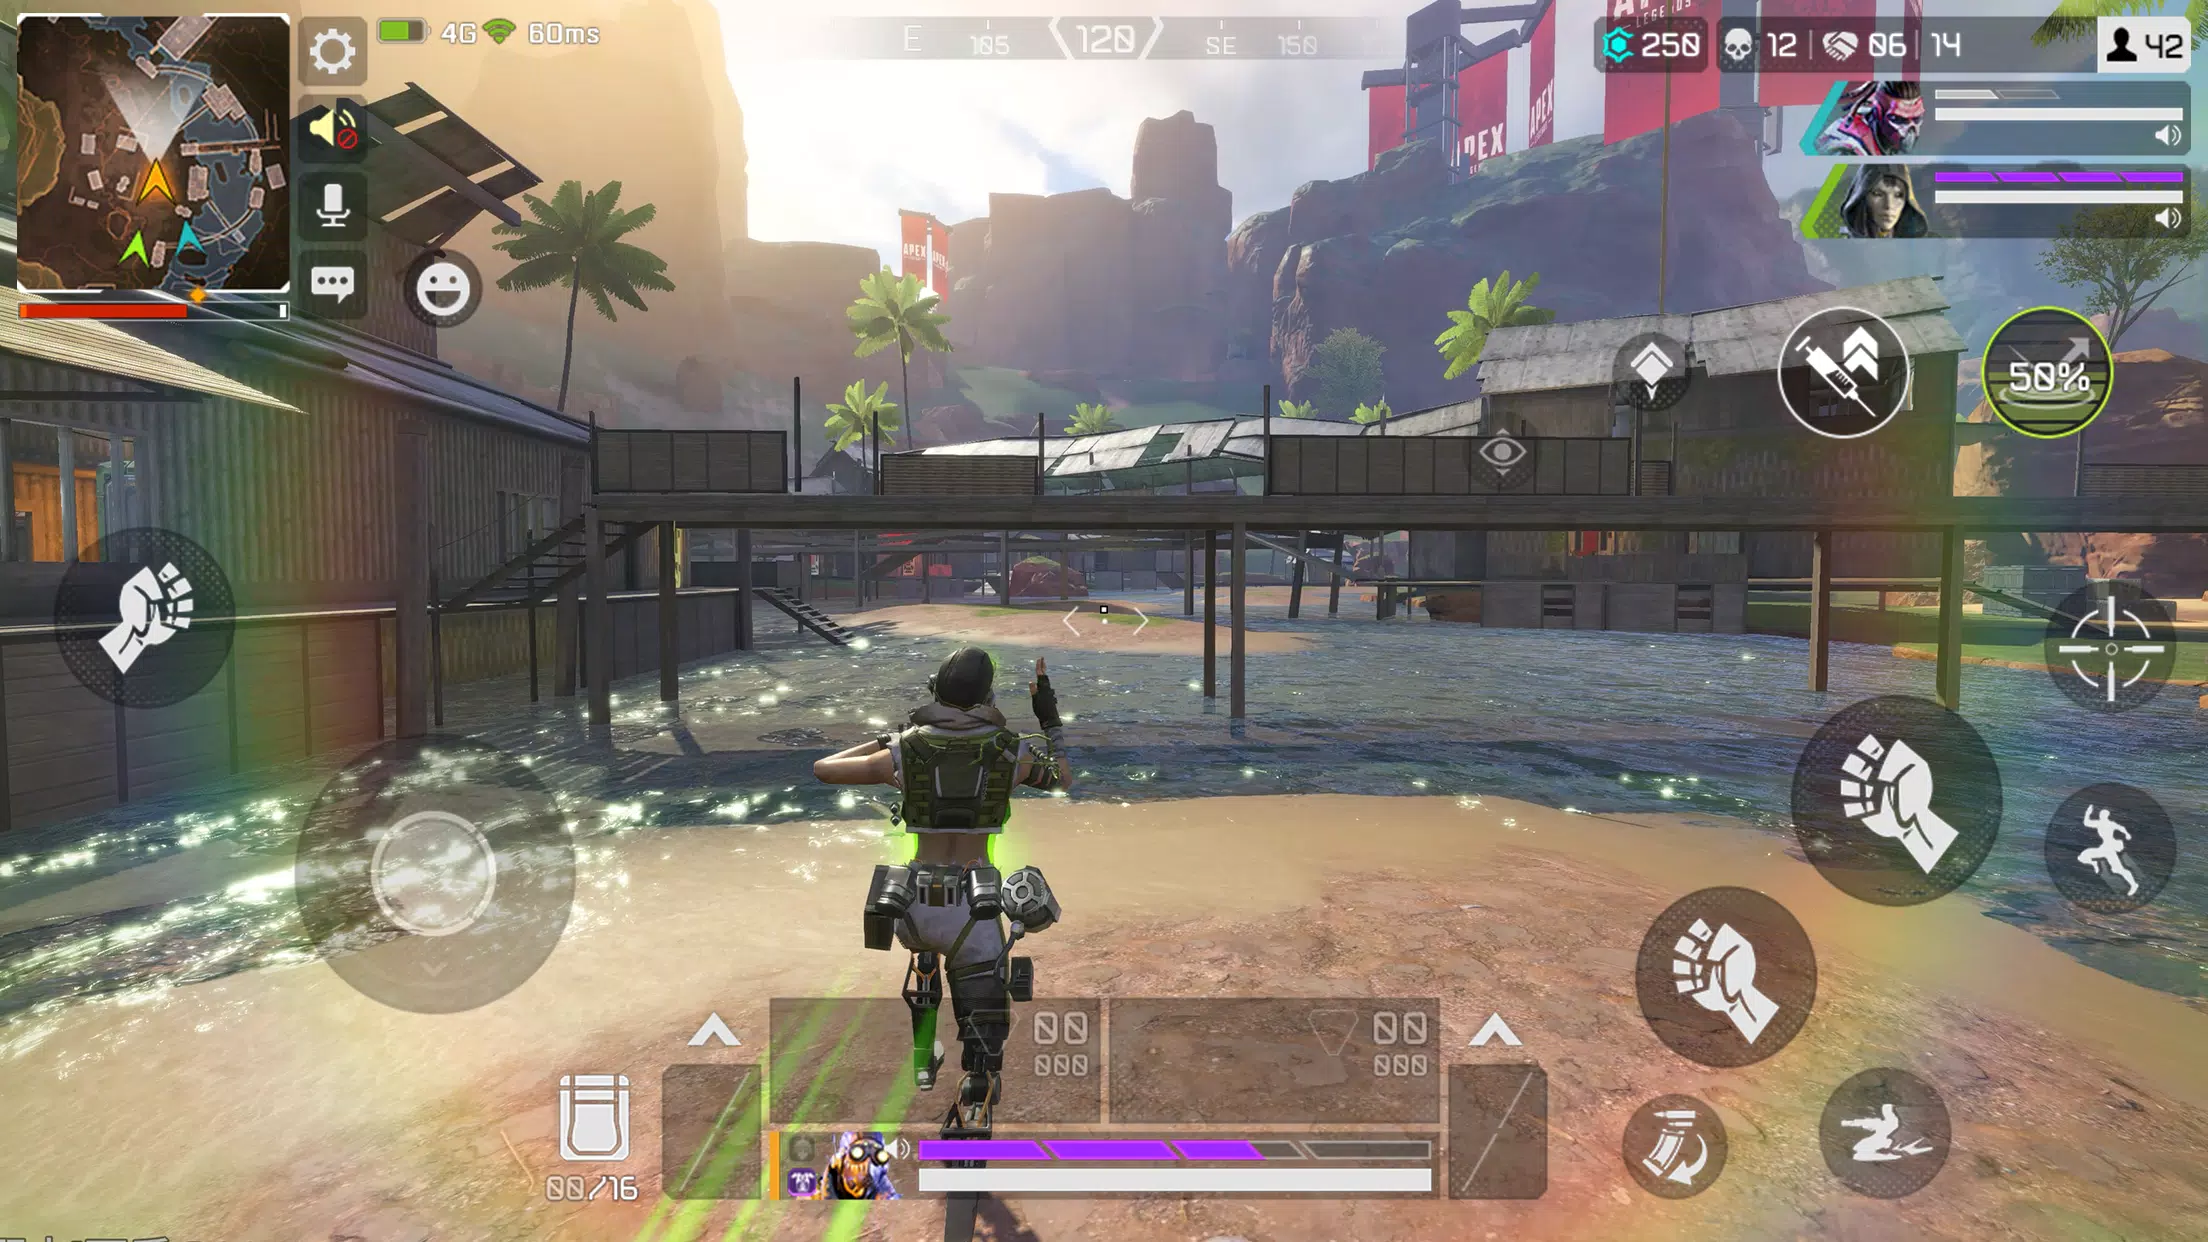 Apex Legends Mobile: Download Size, Release Date, Requirements